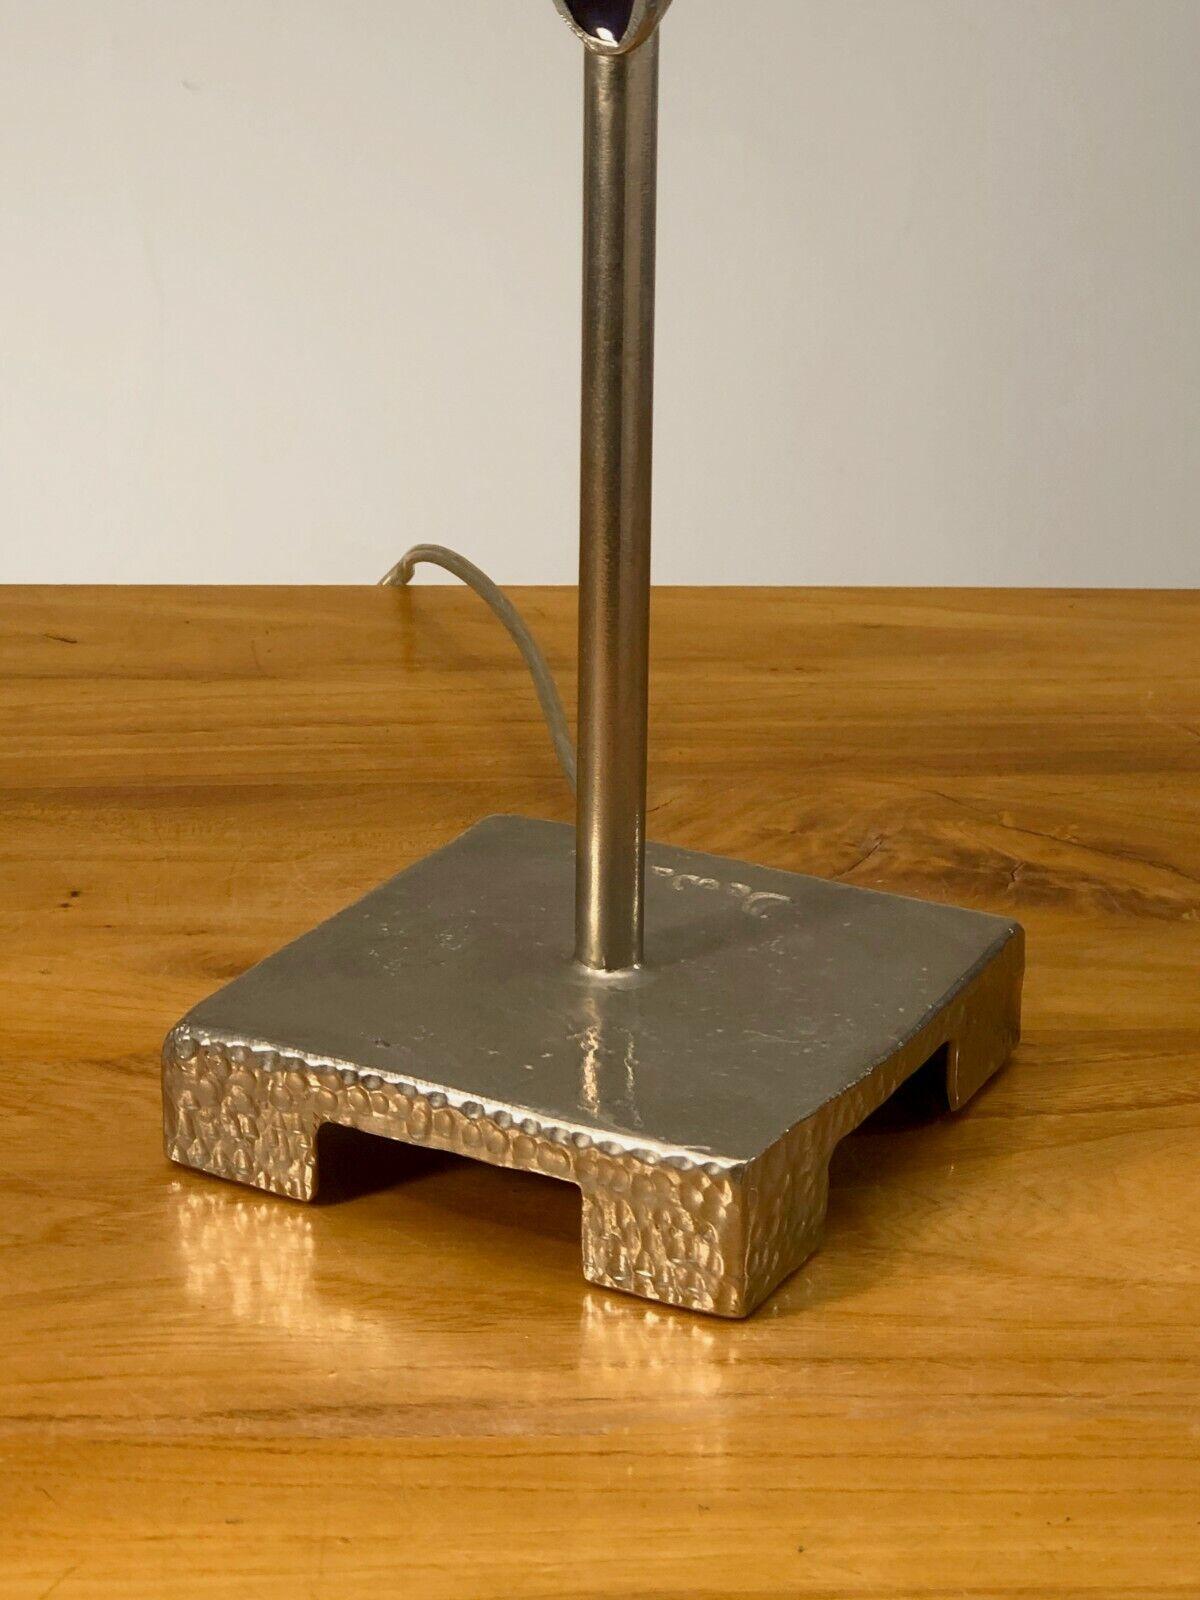 Post-Modern A POST-MODERN Sculptural TABLE LAMP by NICOLAS DEWAEL, ed. FONDICA, France 1990 For Sale